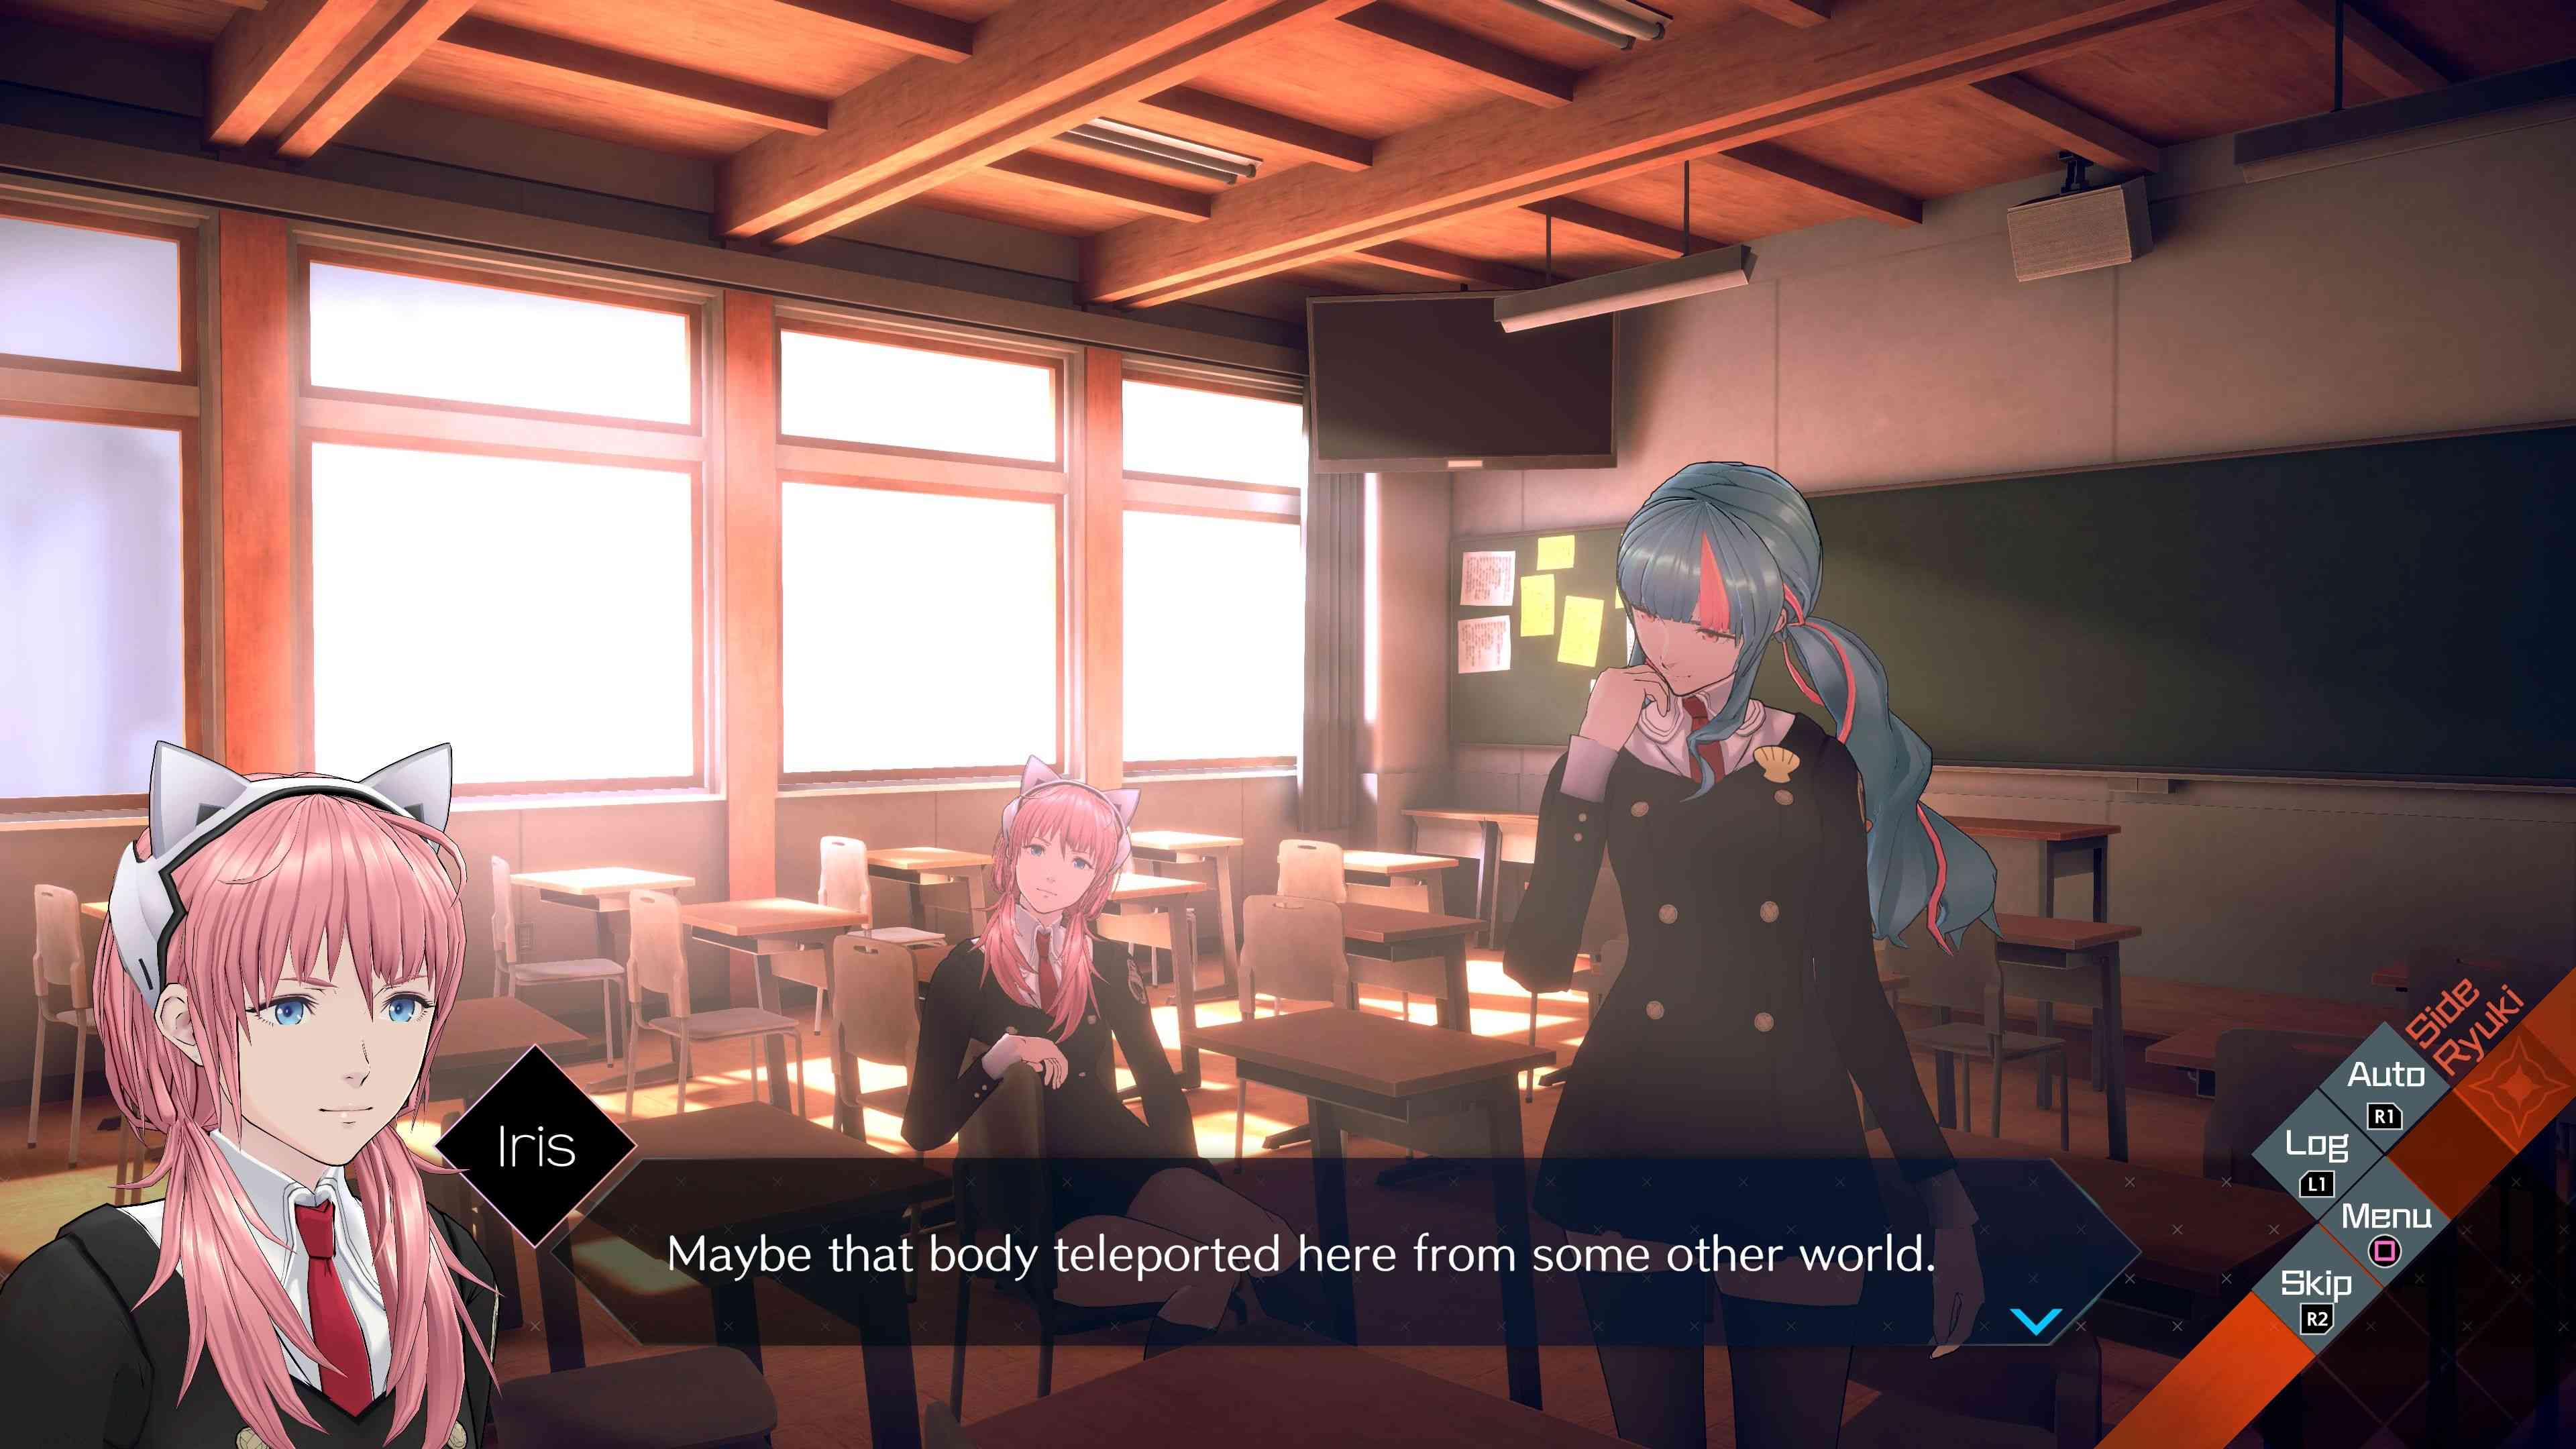 Iris and Mame from AI: The Somnium Files - nirvanA Initiative in a classroom, discussing a murder.